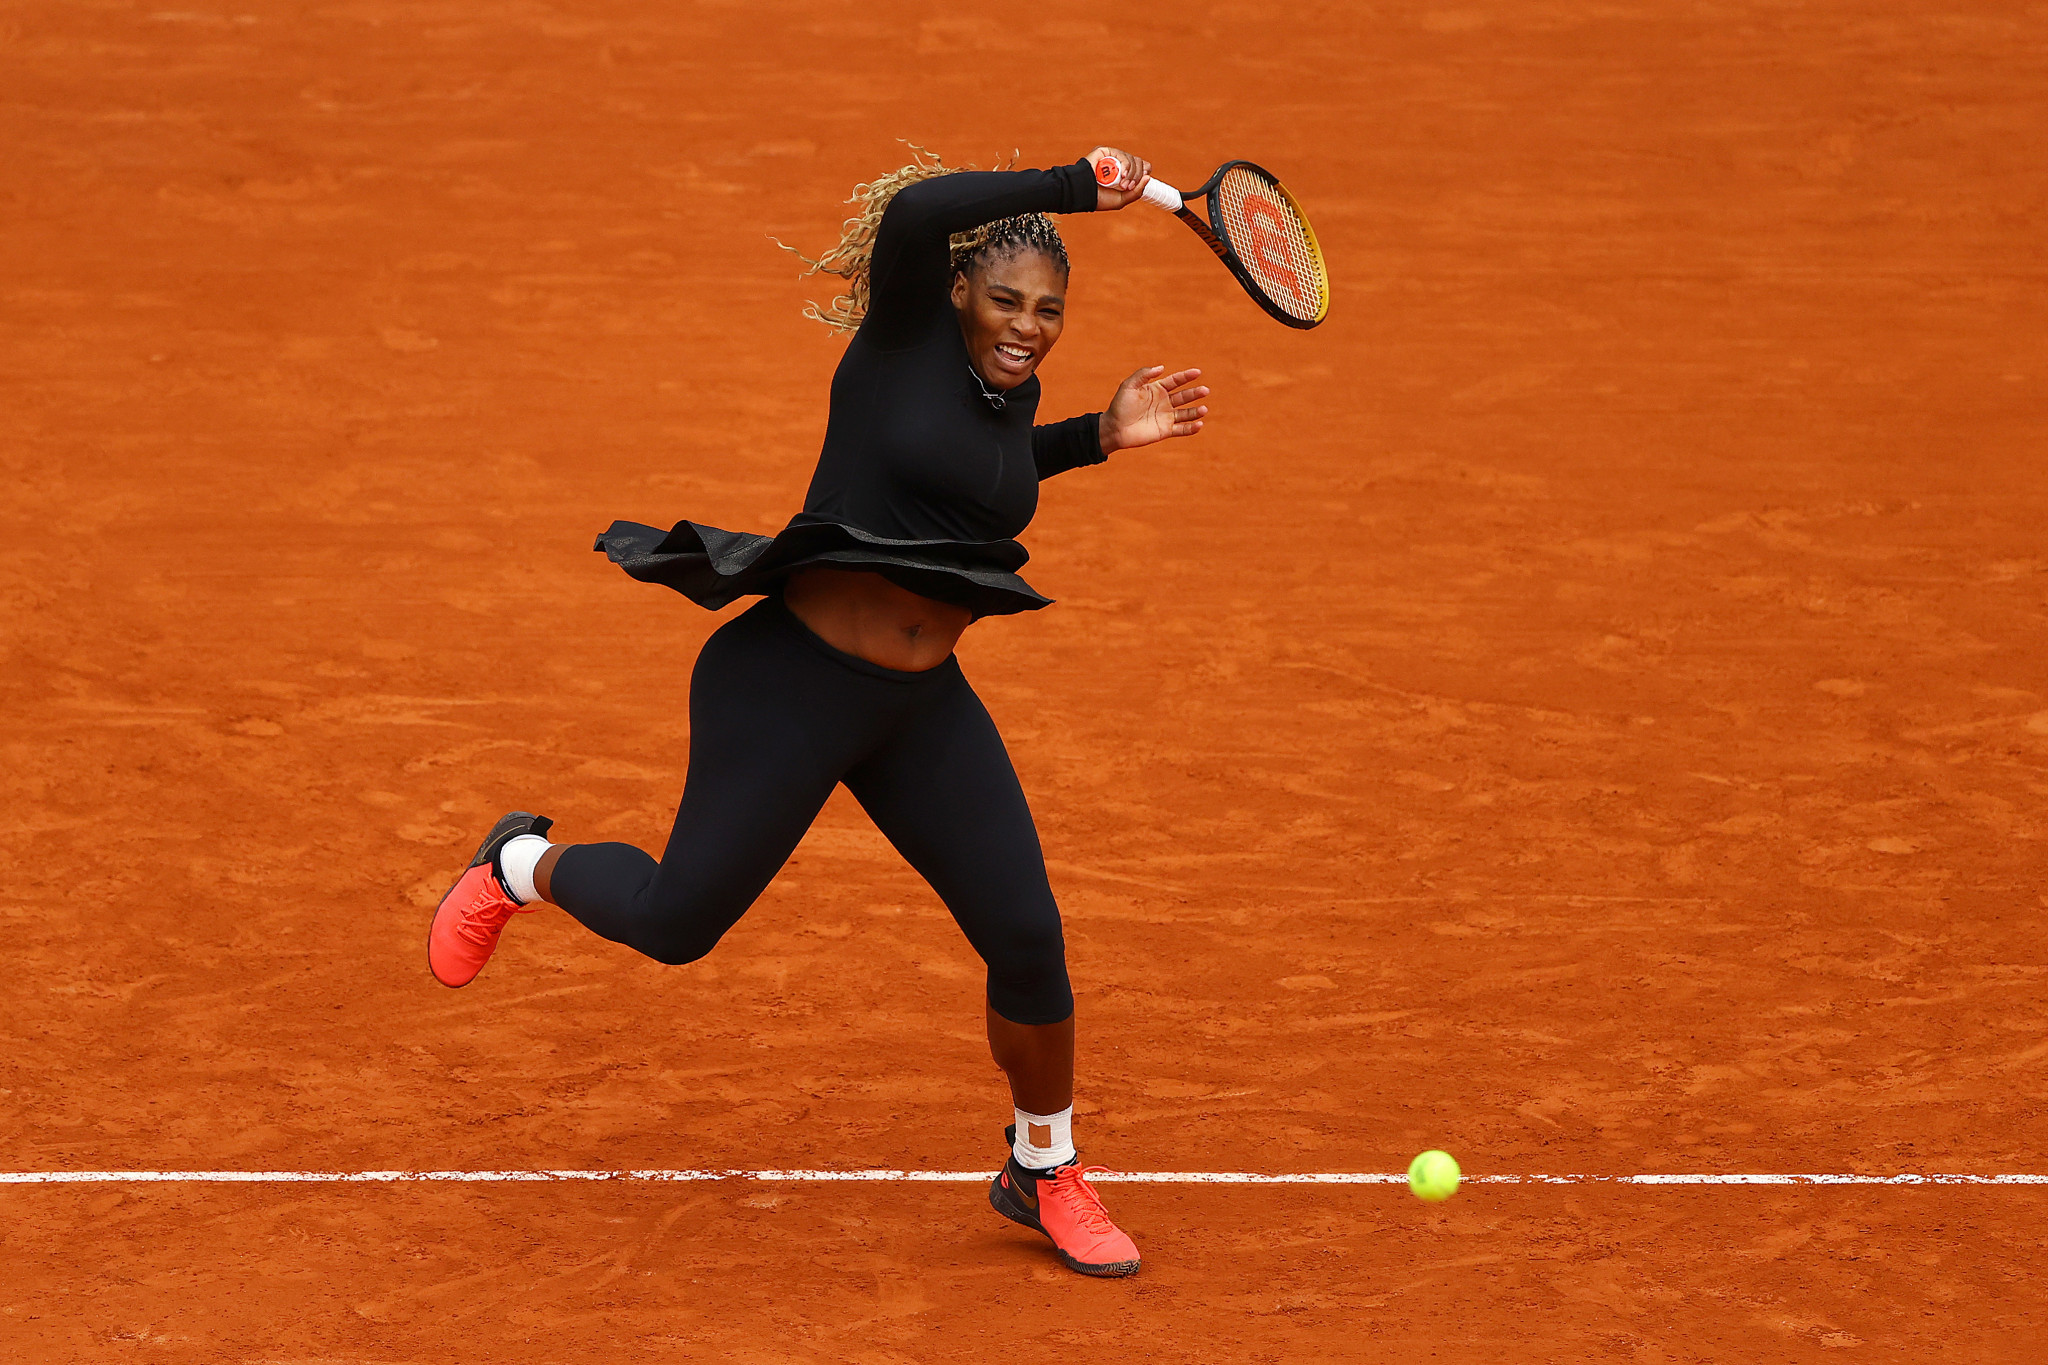 After a first set struggle, Serena Williams cruised to victory in her first round match at Roland Garros ©Getty Images